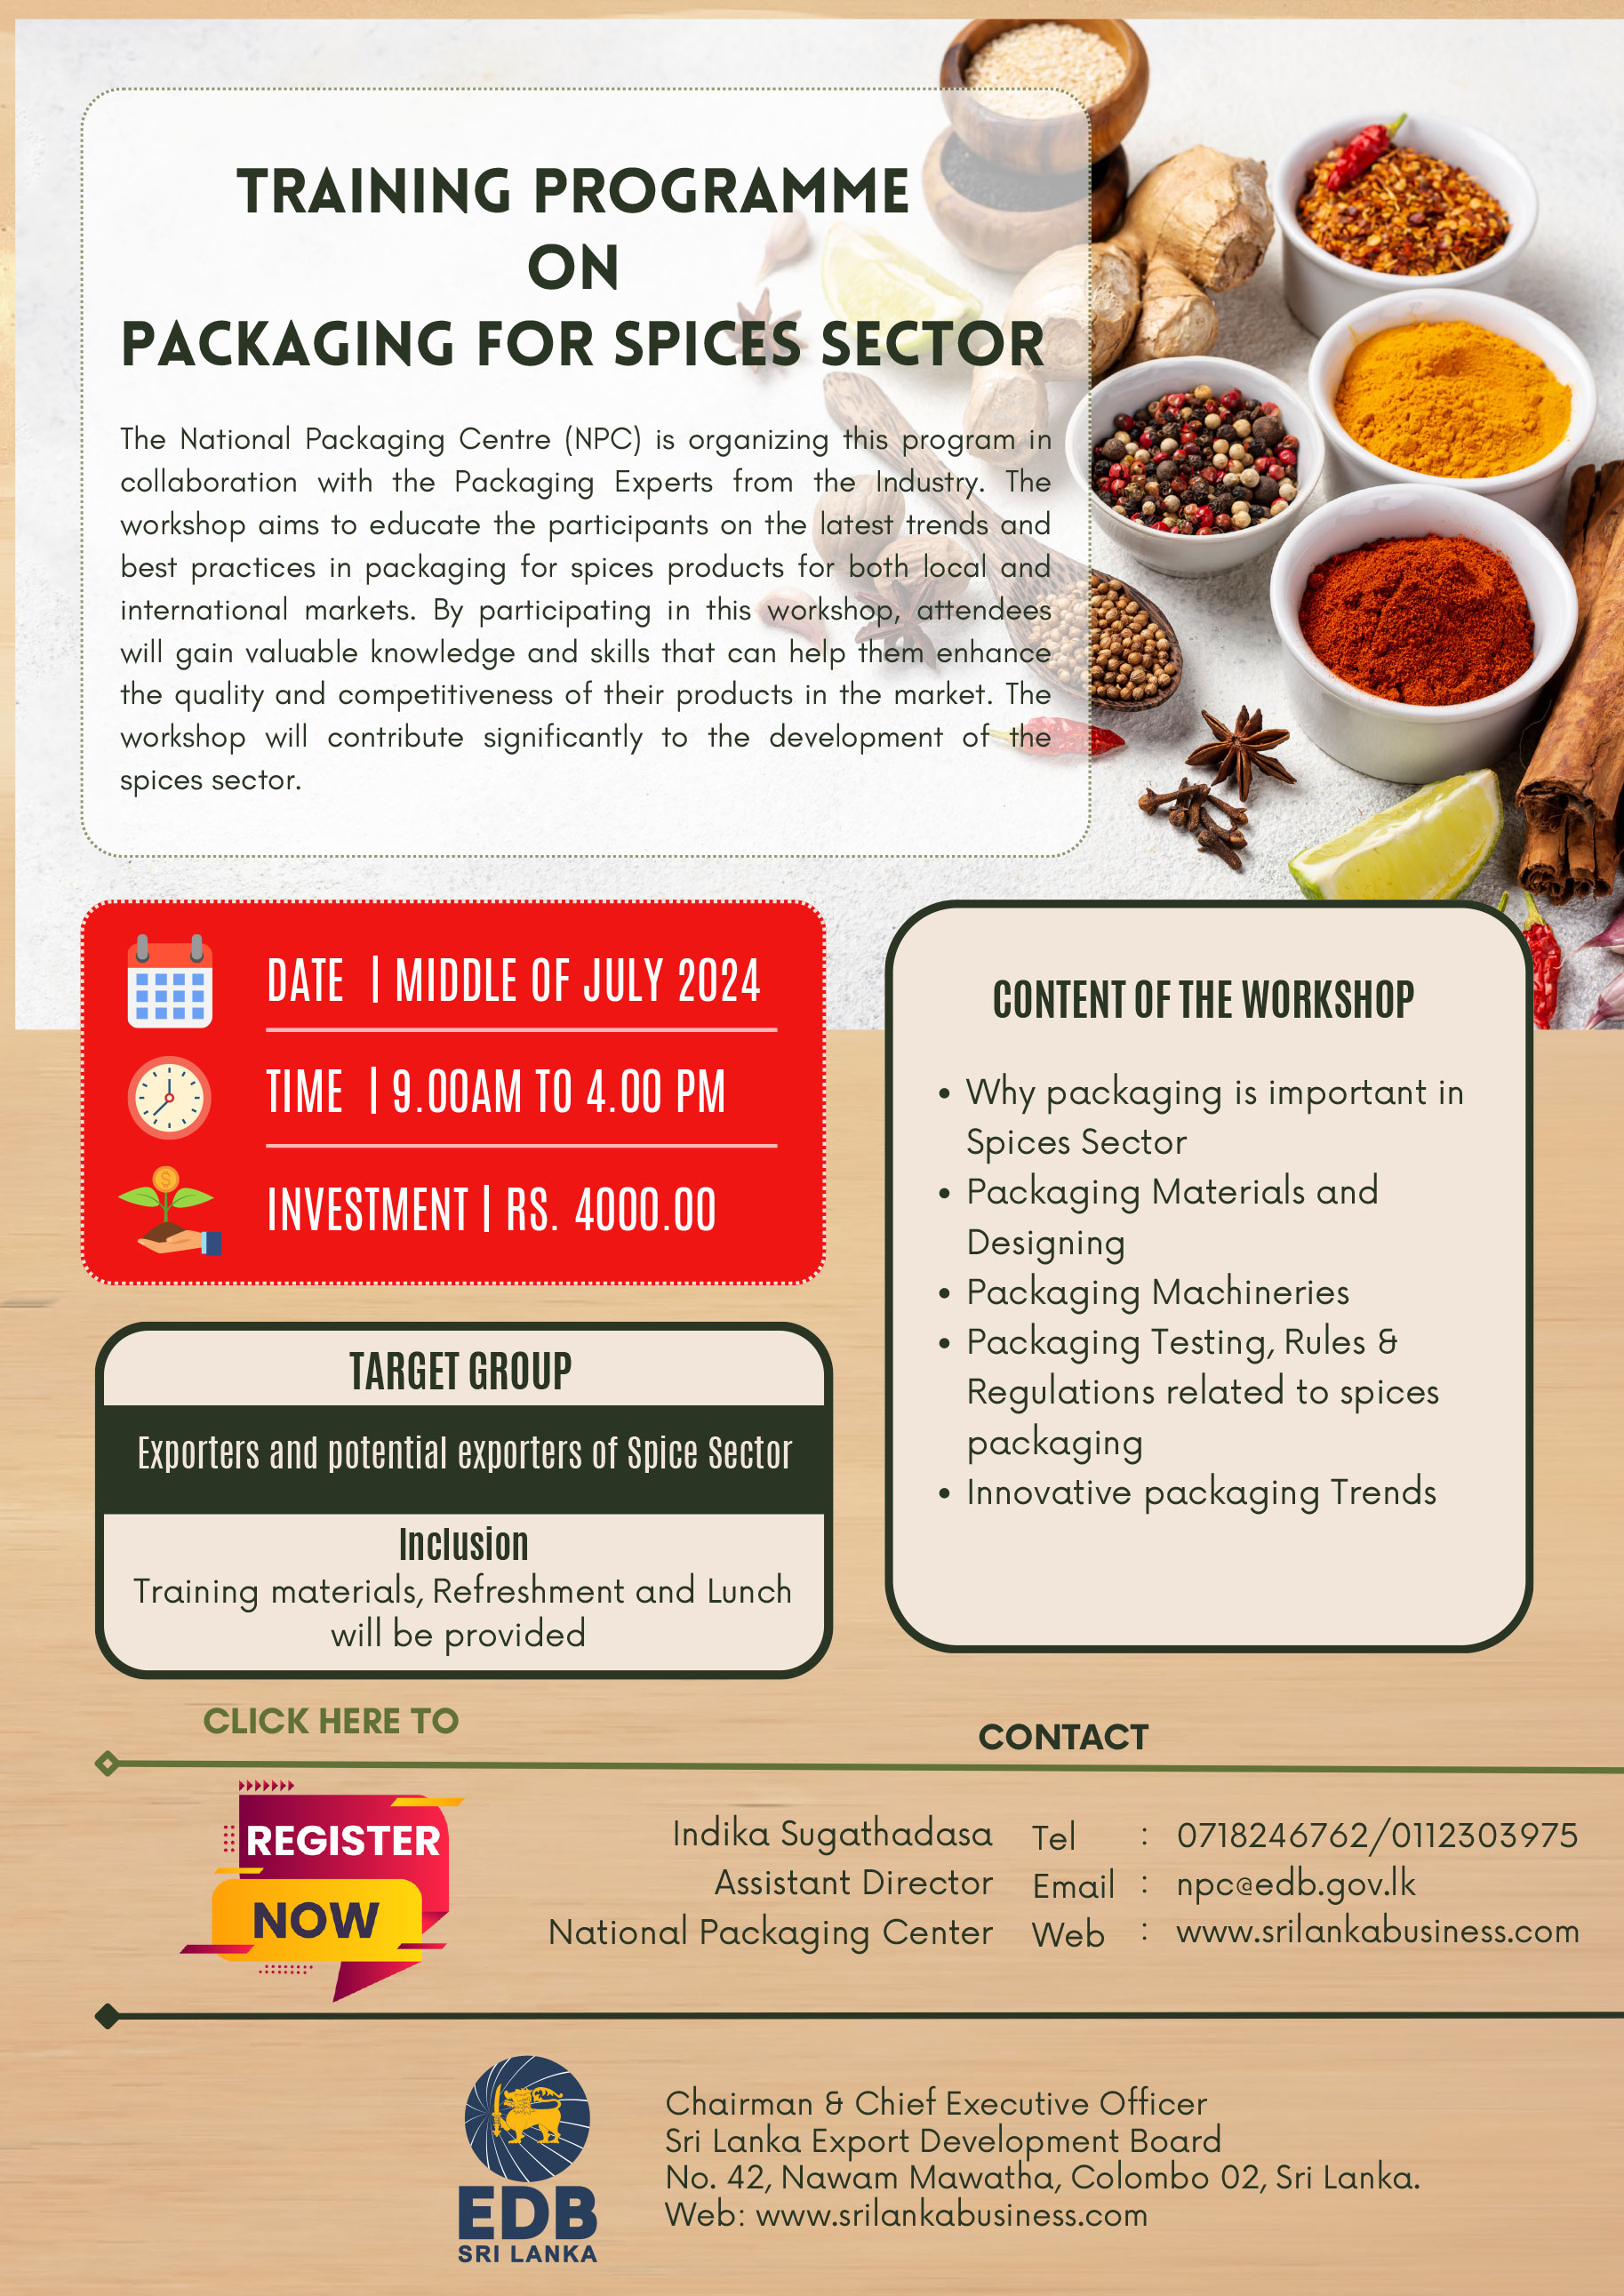 Training Programme on Packaging for Spices sector